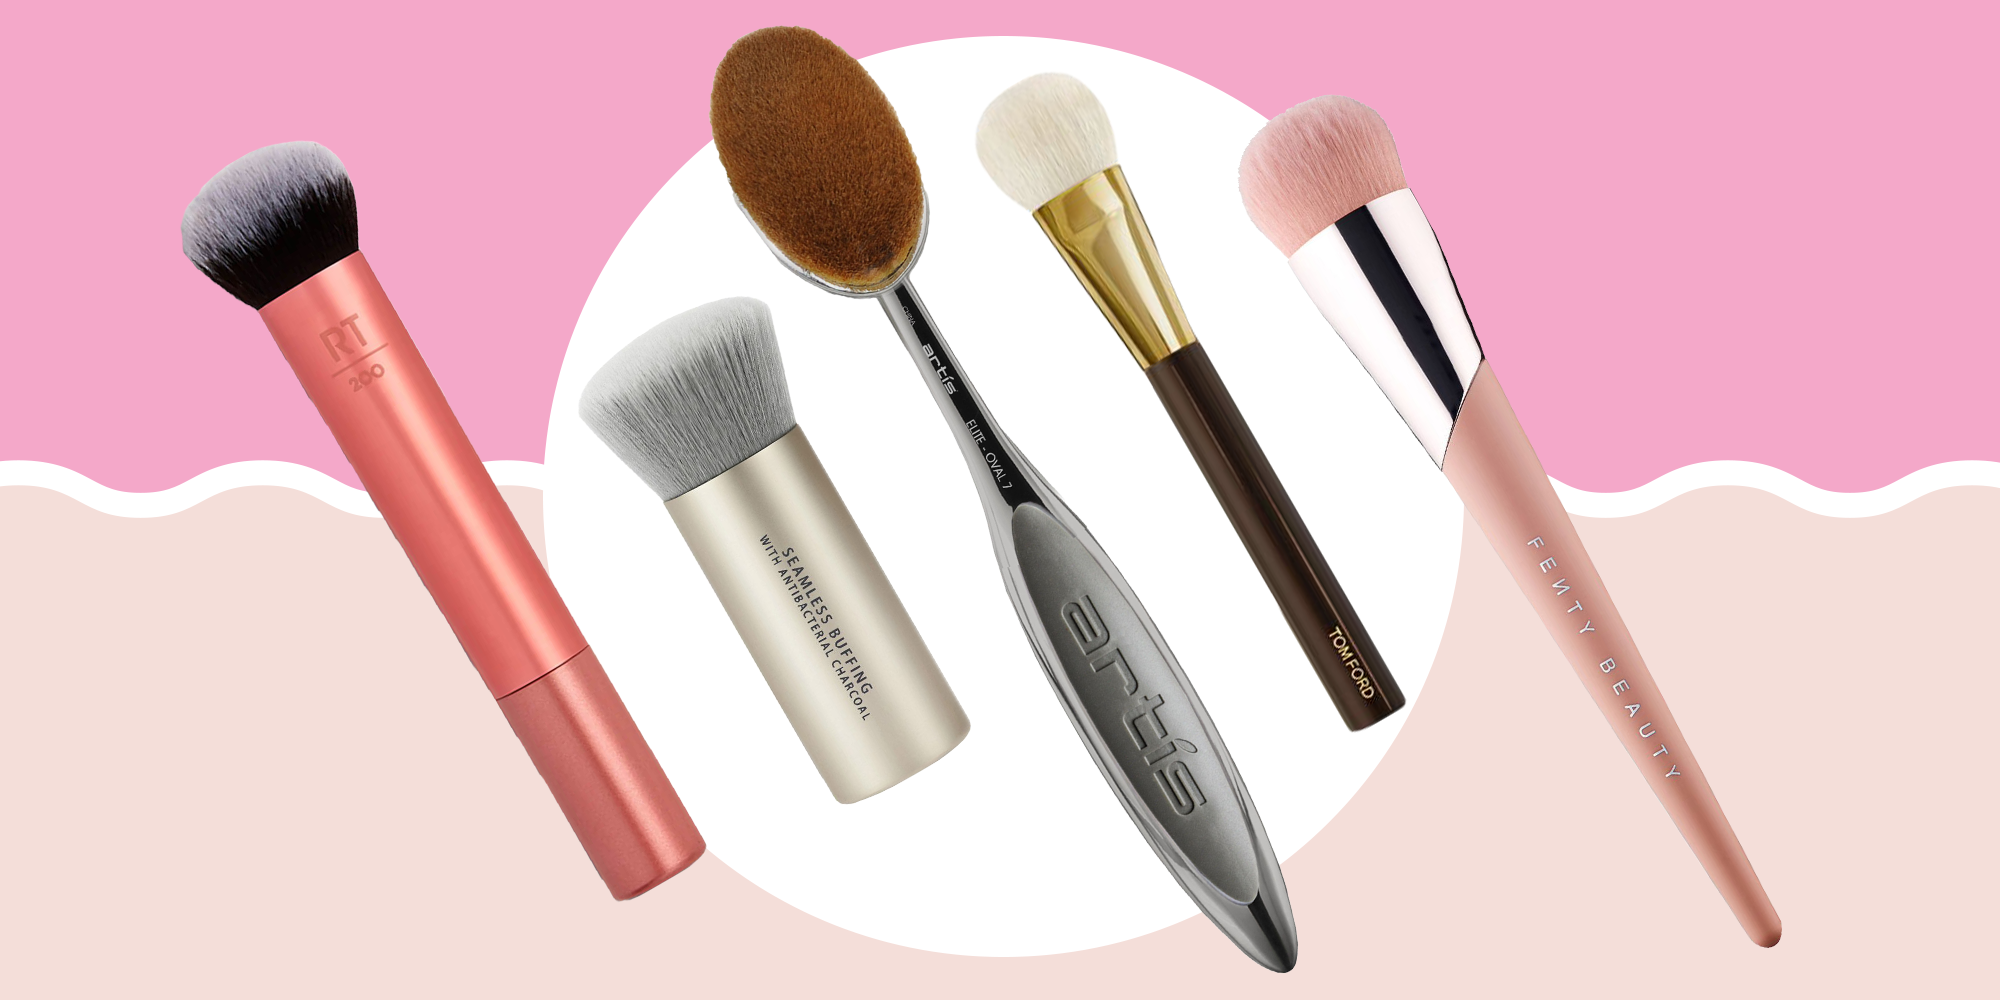 10 Best Foundation Brushes 2022 - How To Apply Foundation